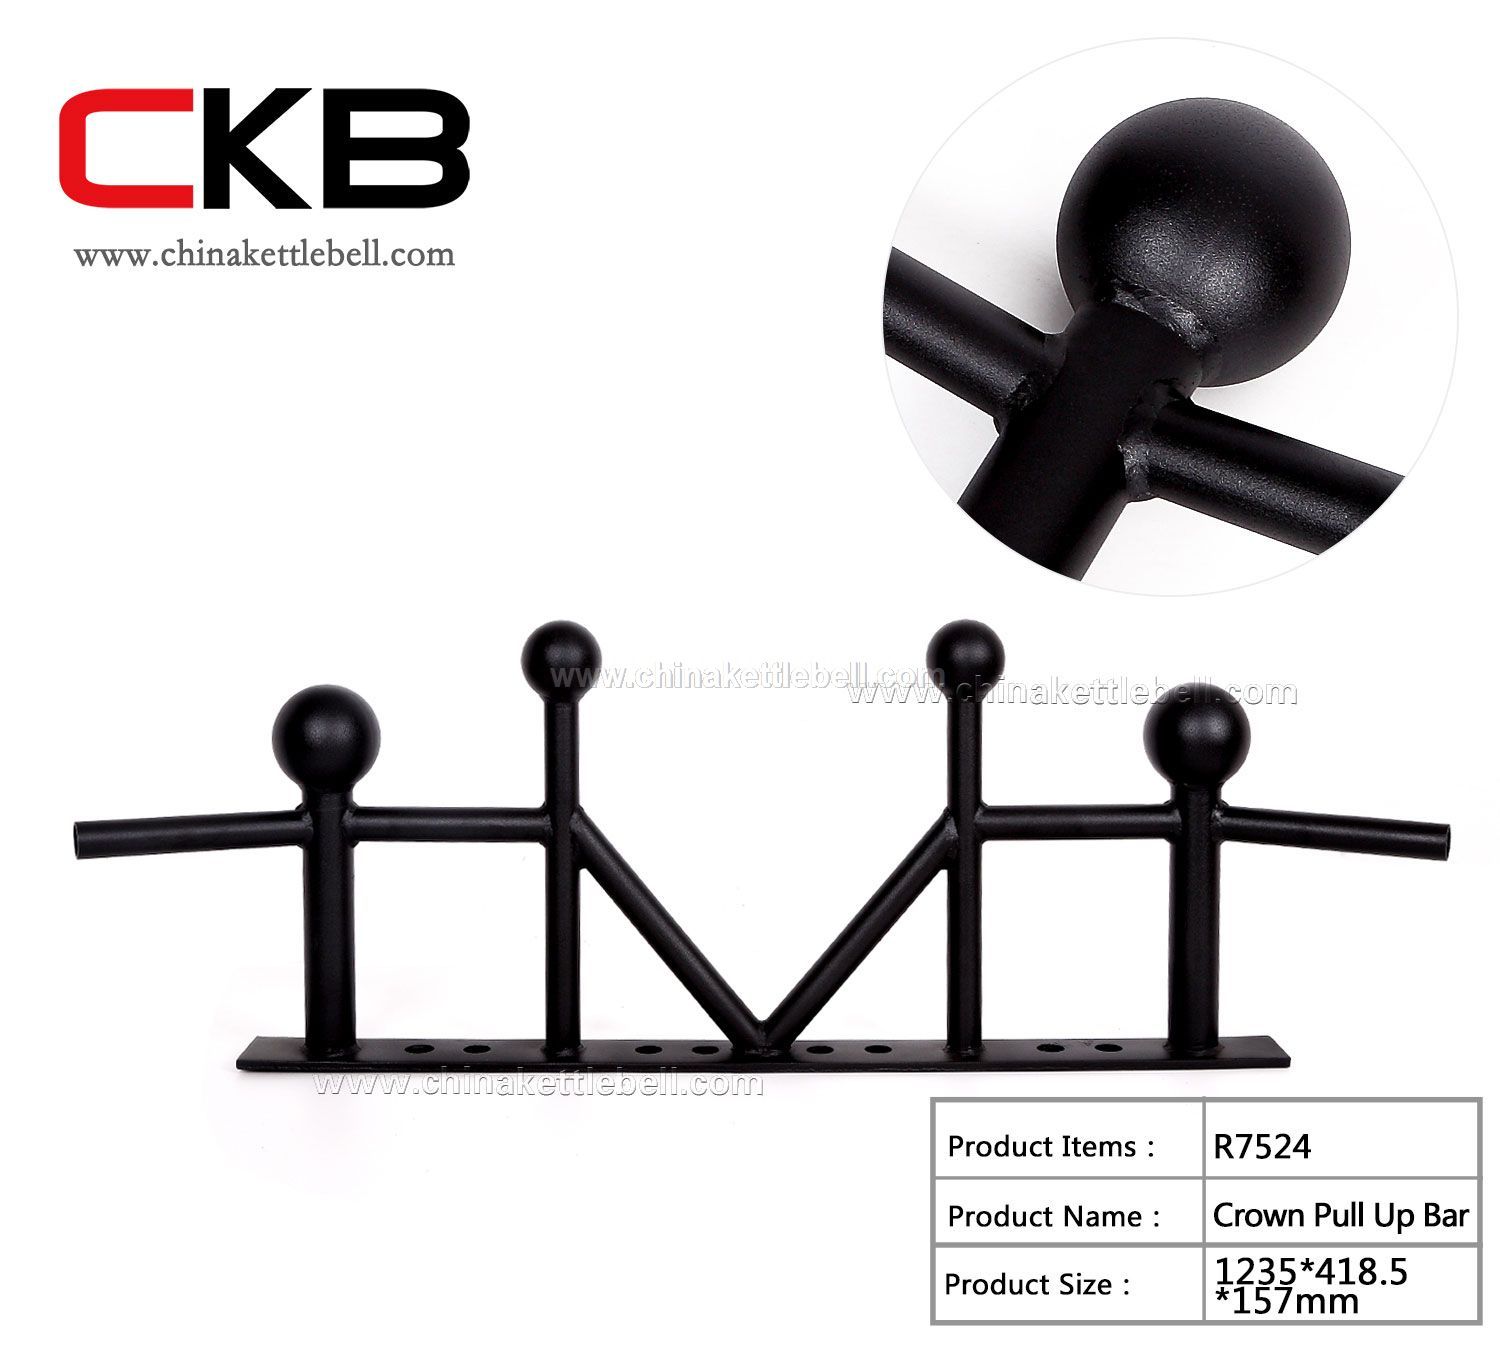 Crown Pull Up Bar